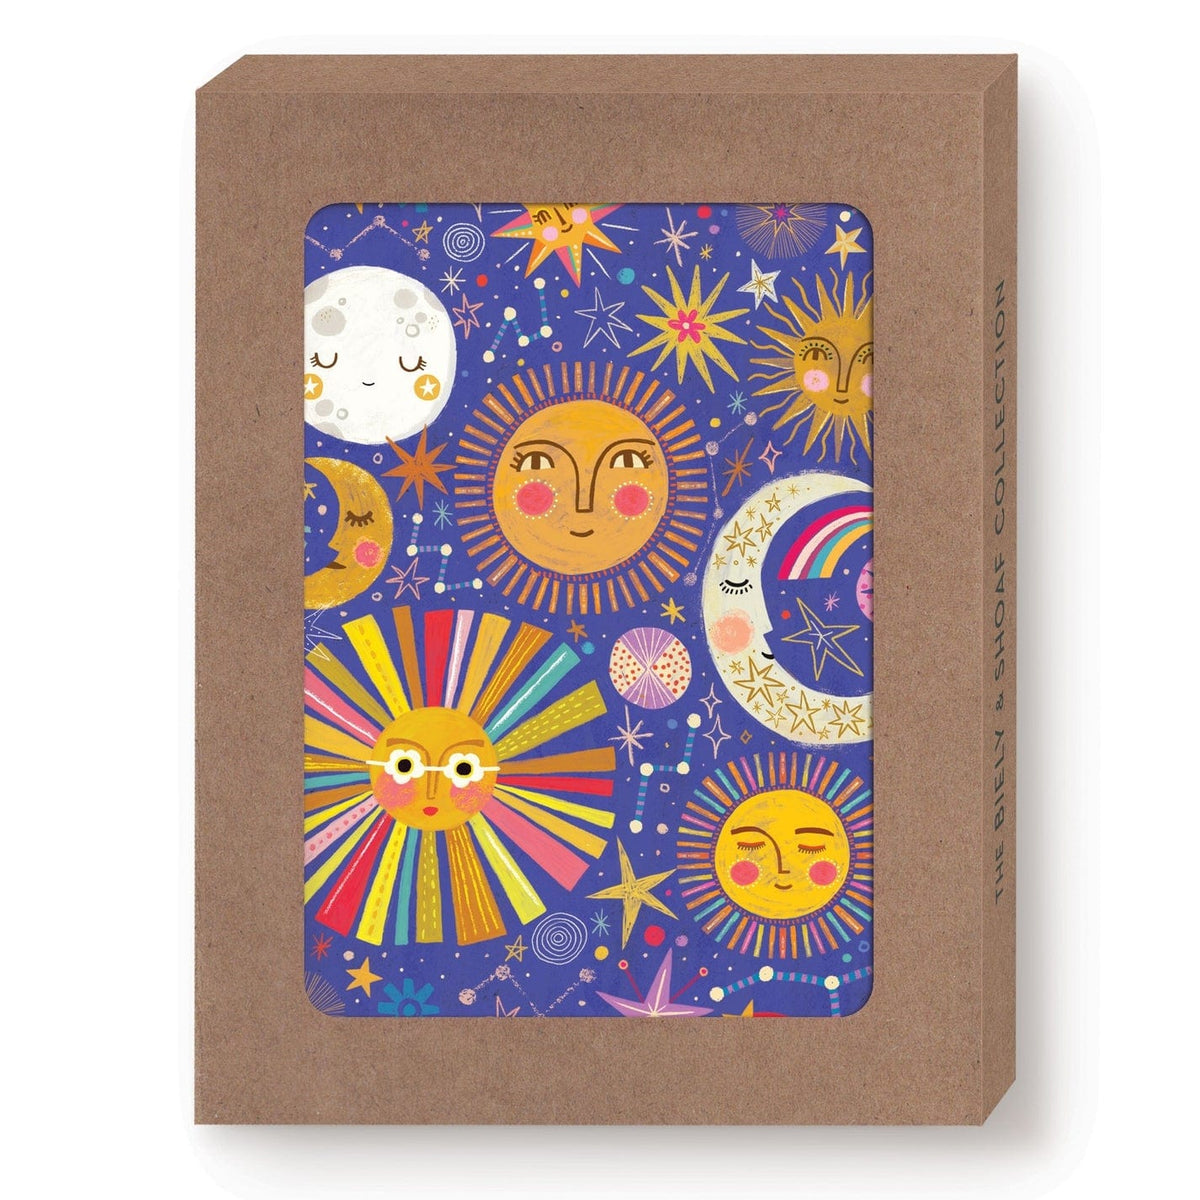 Biely &amp; Shoaf Suns &amp; Moons Boxed Cards - Set of 10